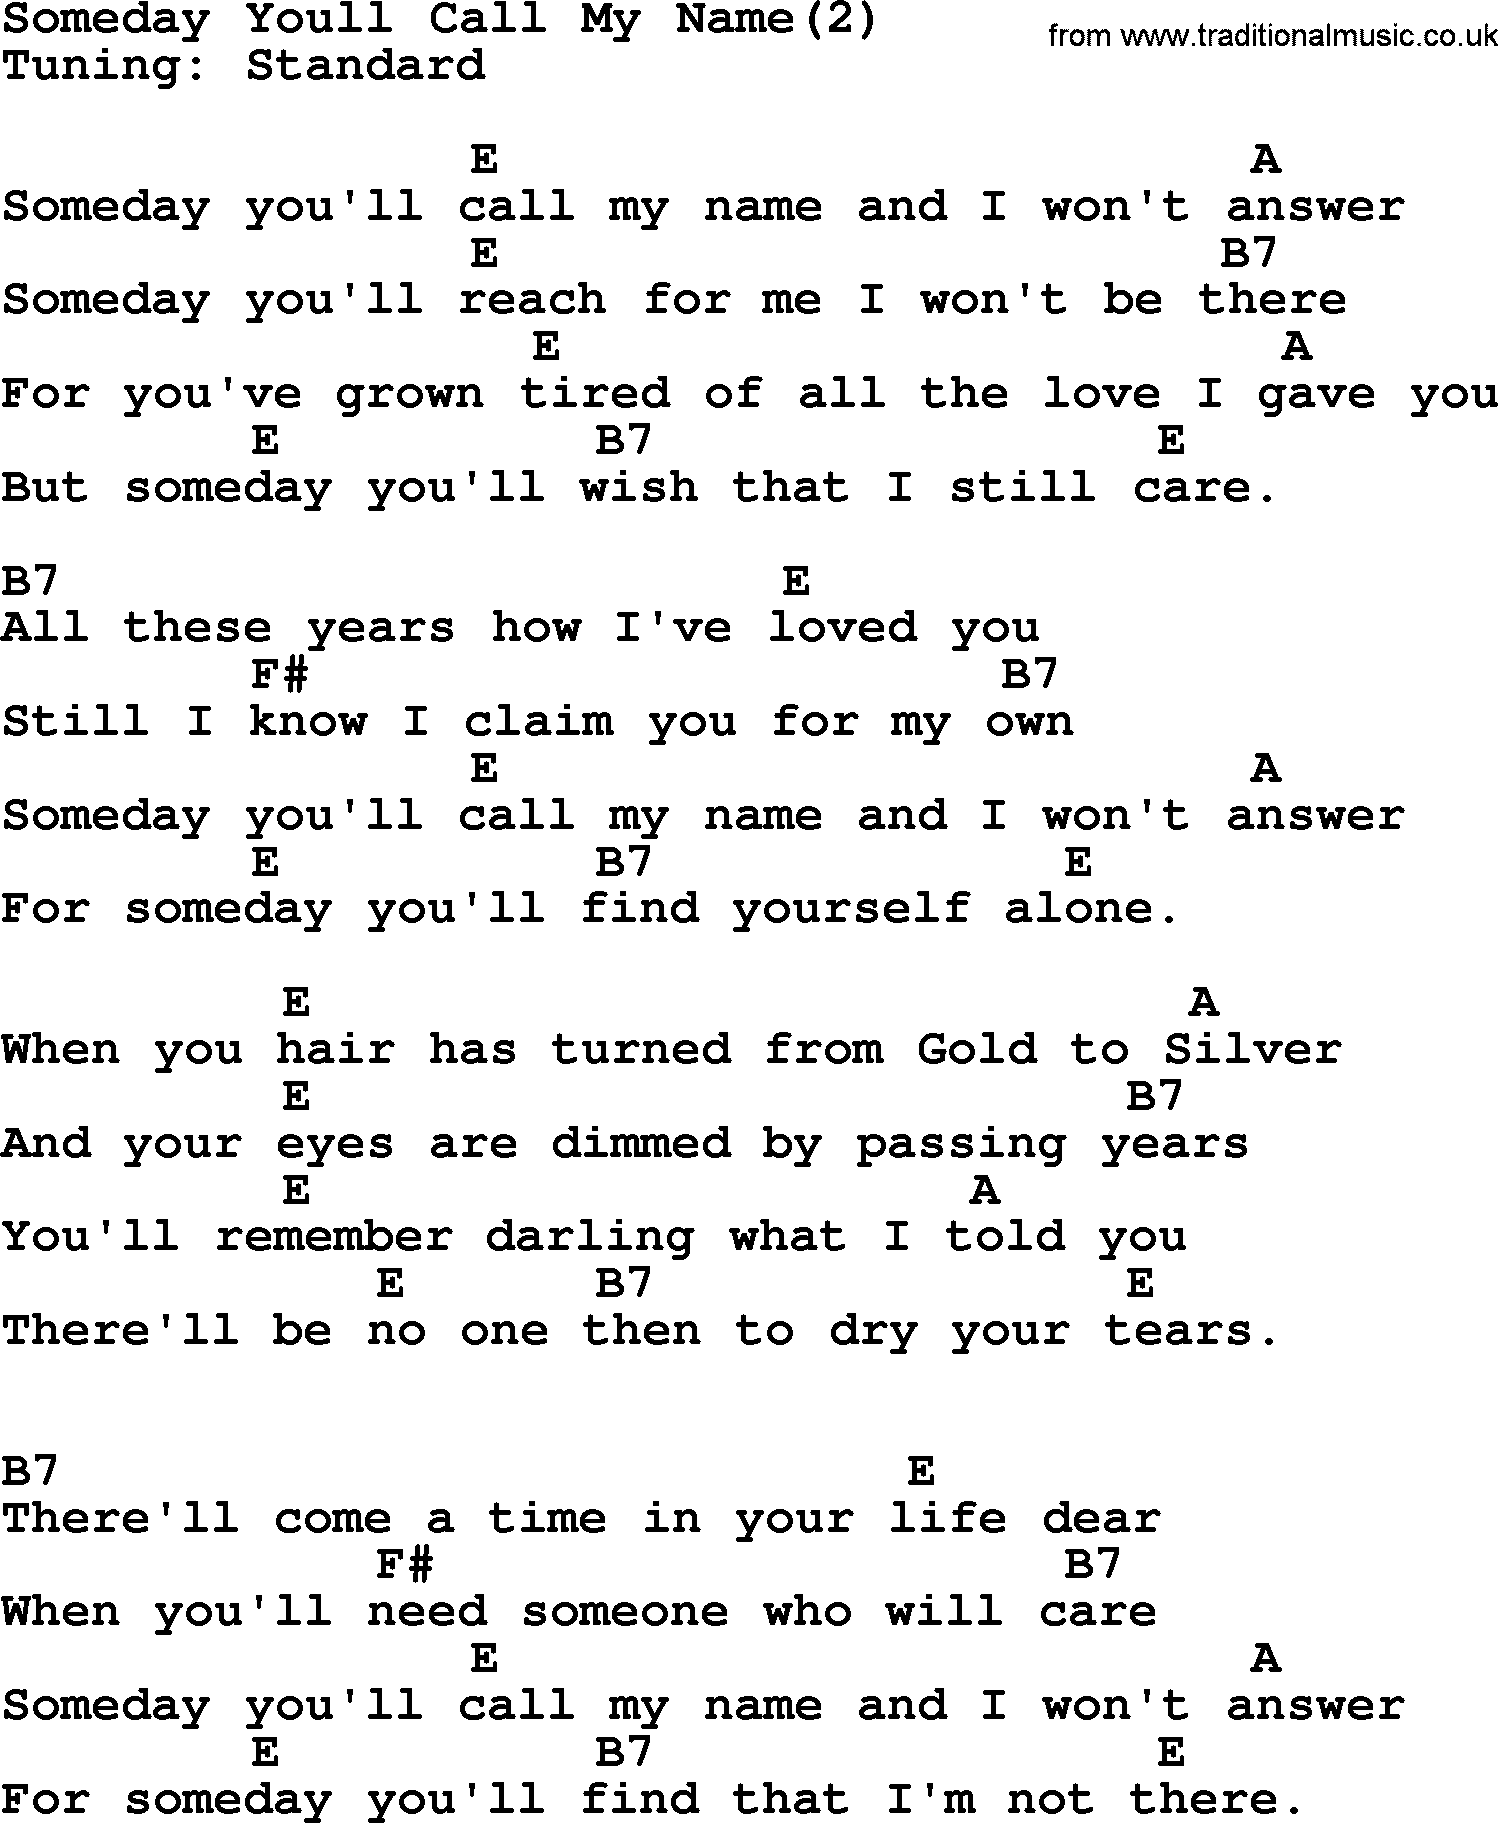 Hank Williams song Someday Youll Call My Name(2), lyrics and chords